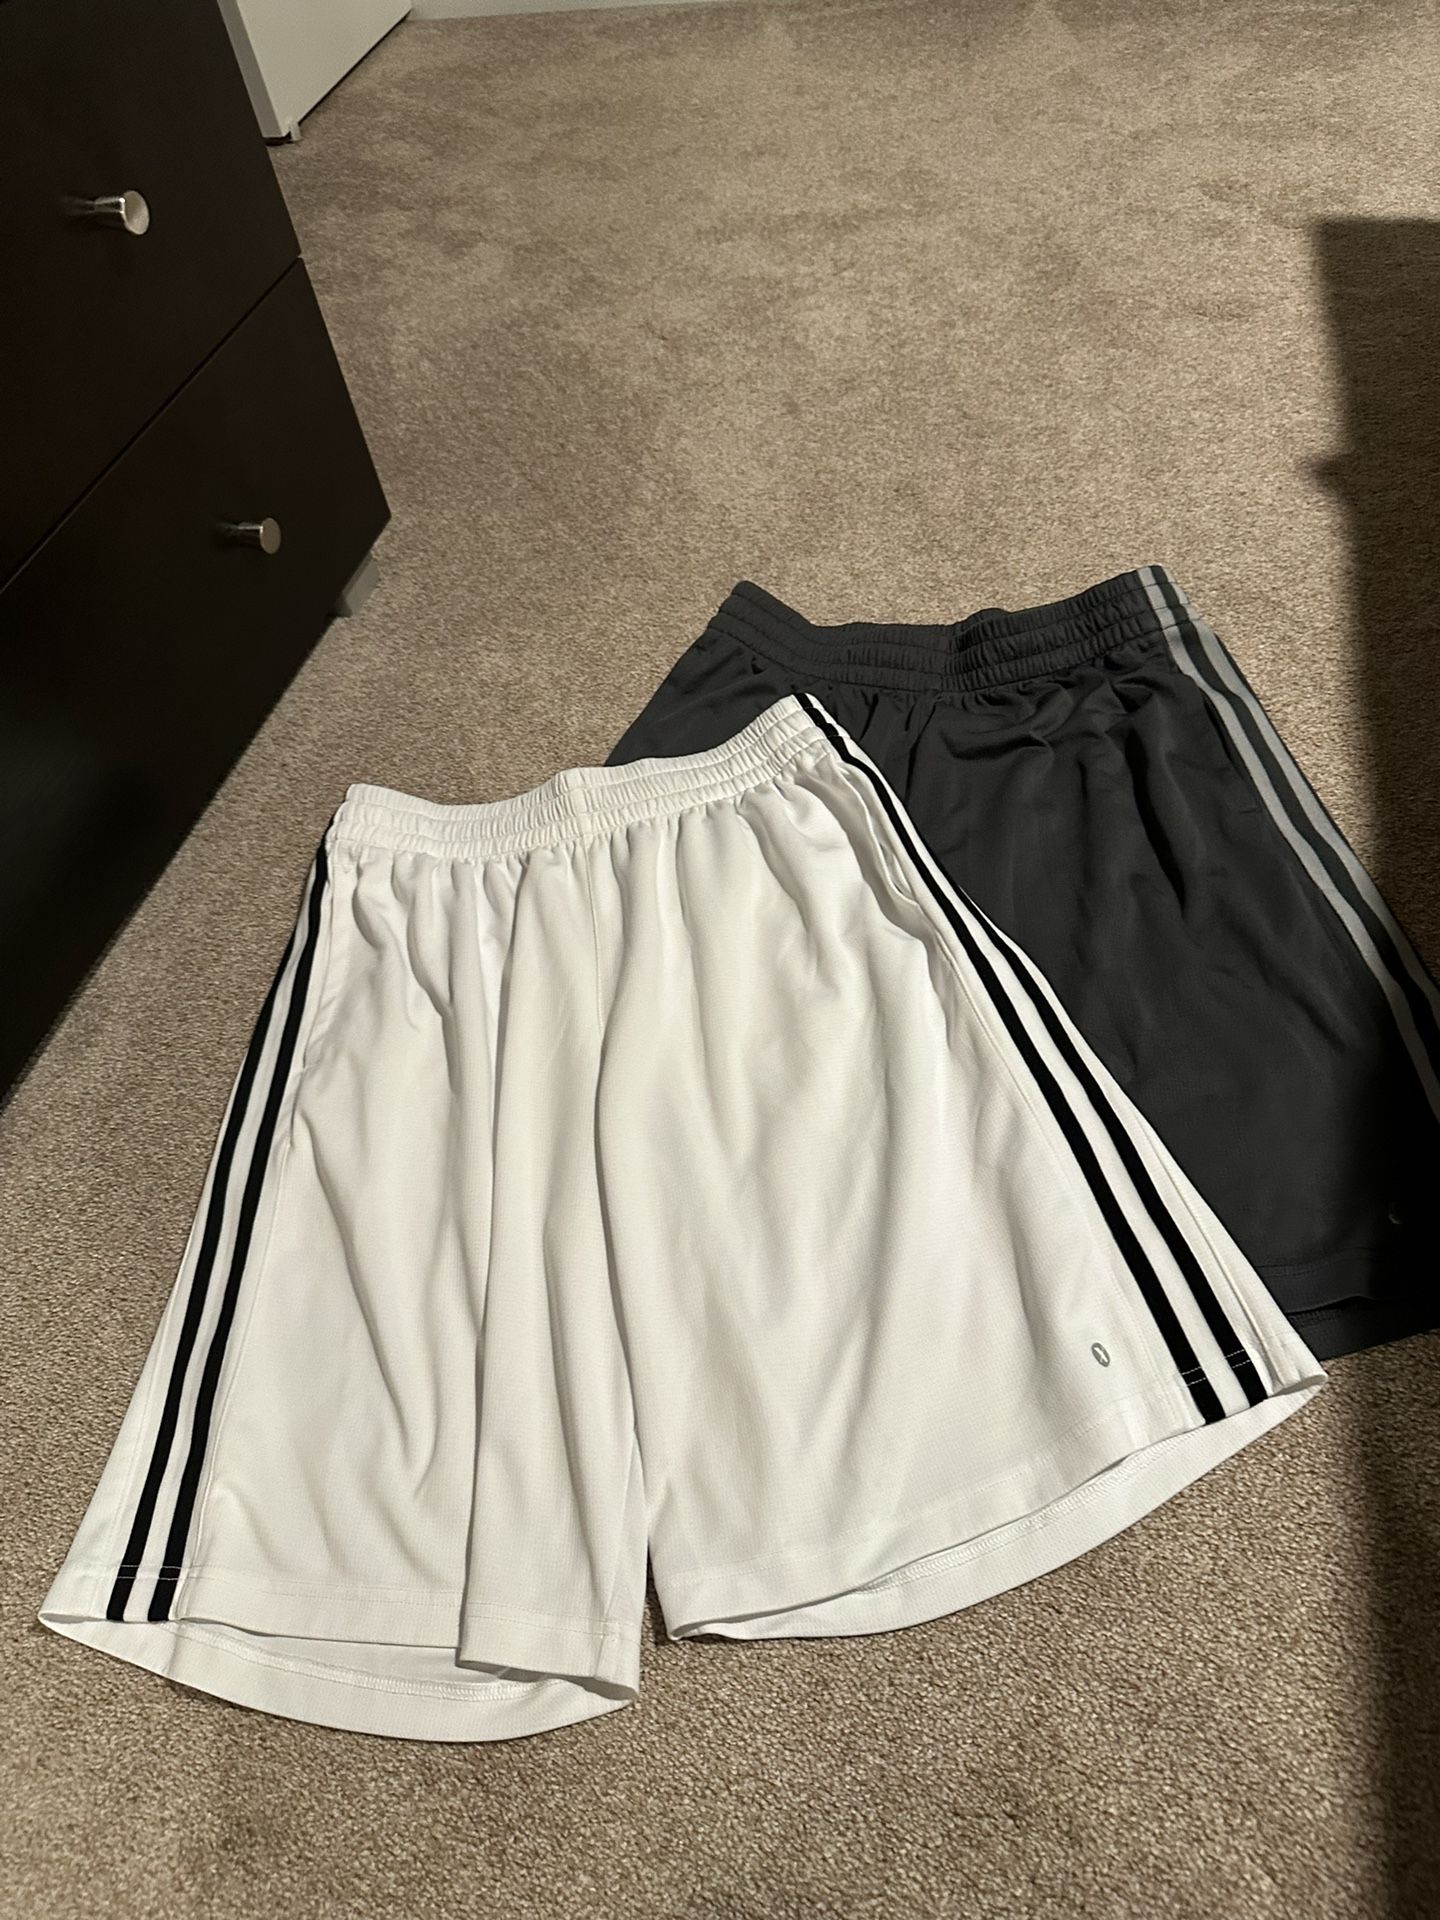 Set Of 2 Pairs Large Xersion Mesh Shorts - White and Gray